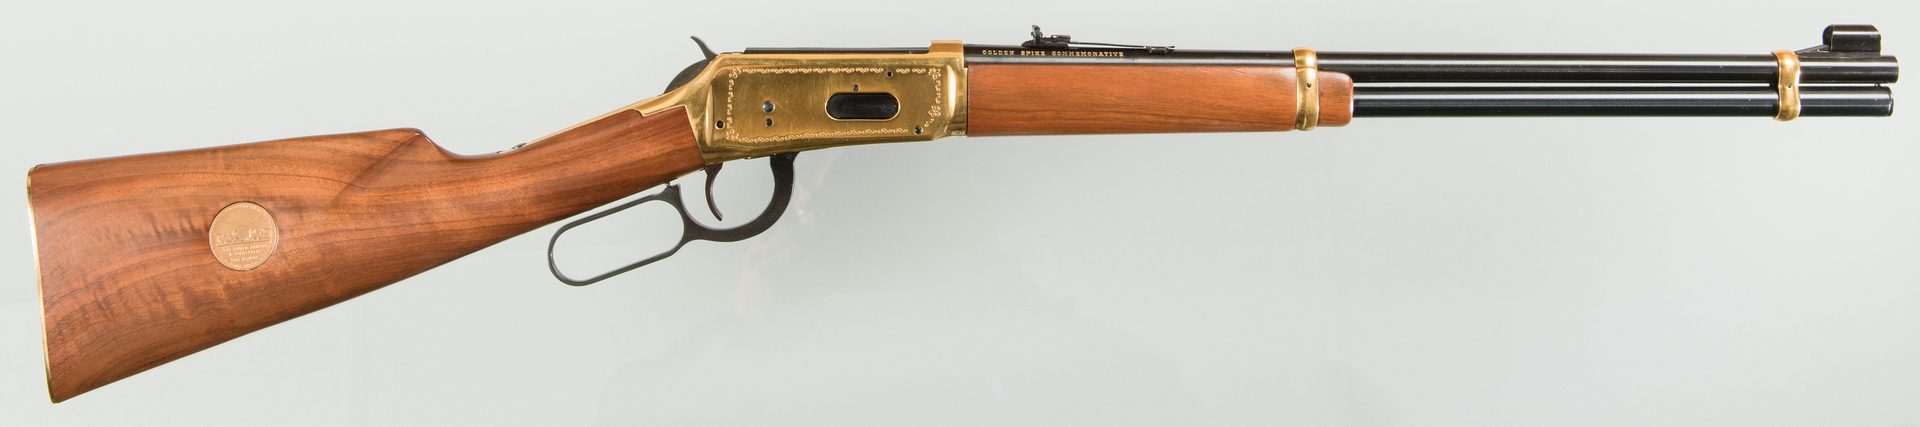 Lot 828: Winchester 94 Commemorative Lever Action rifle, 30-30